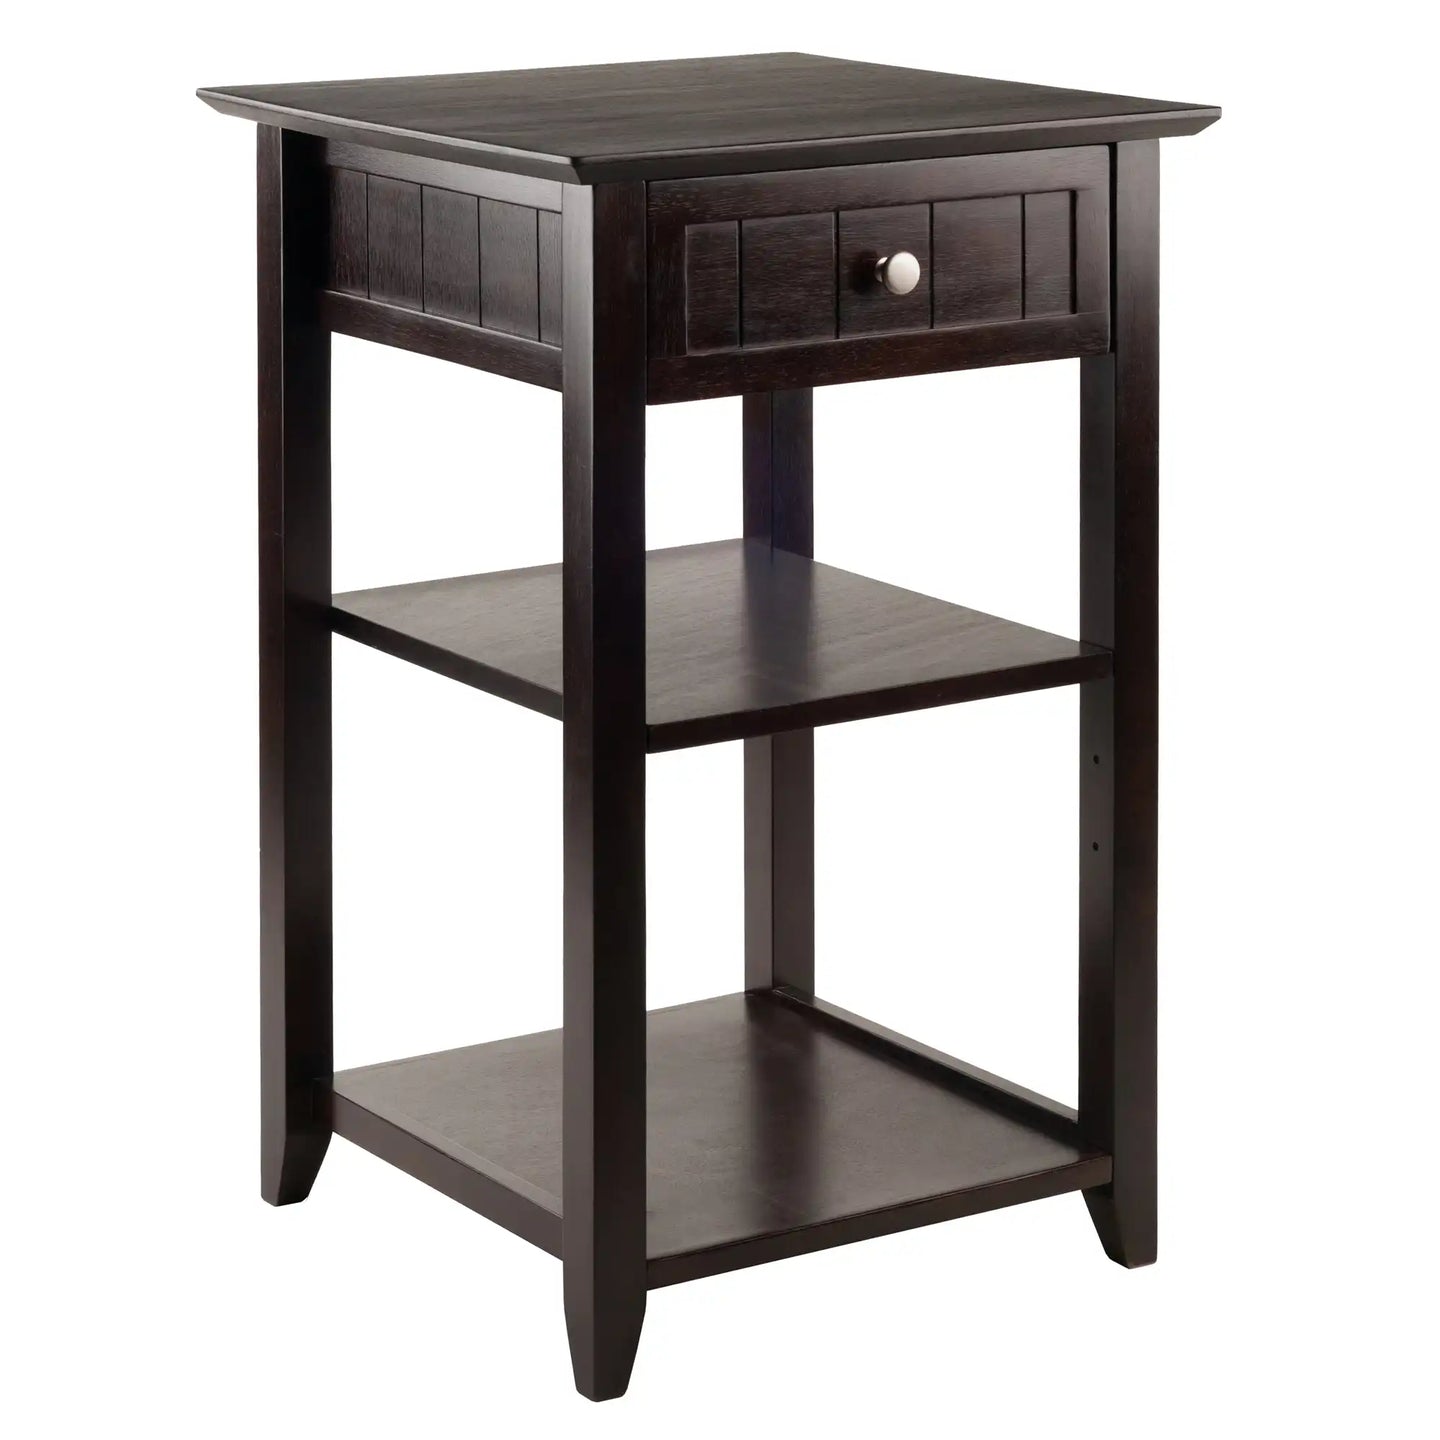 Winsome Wood Burke Home Office Printer Stand in Coffee